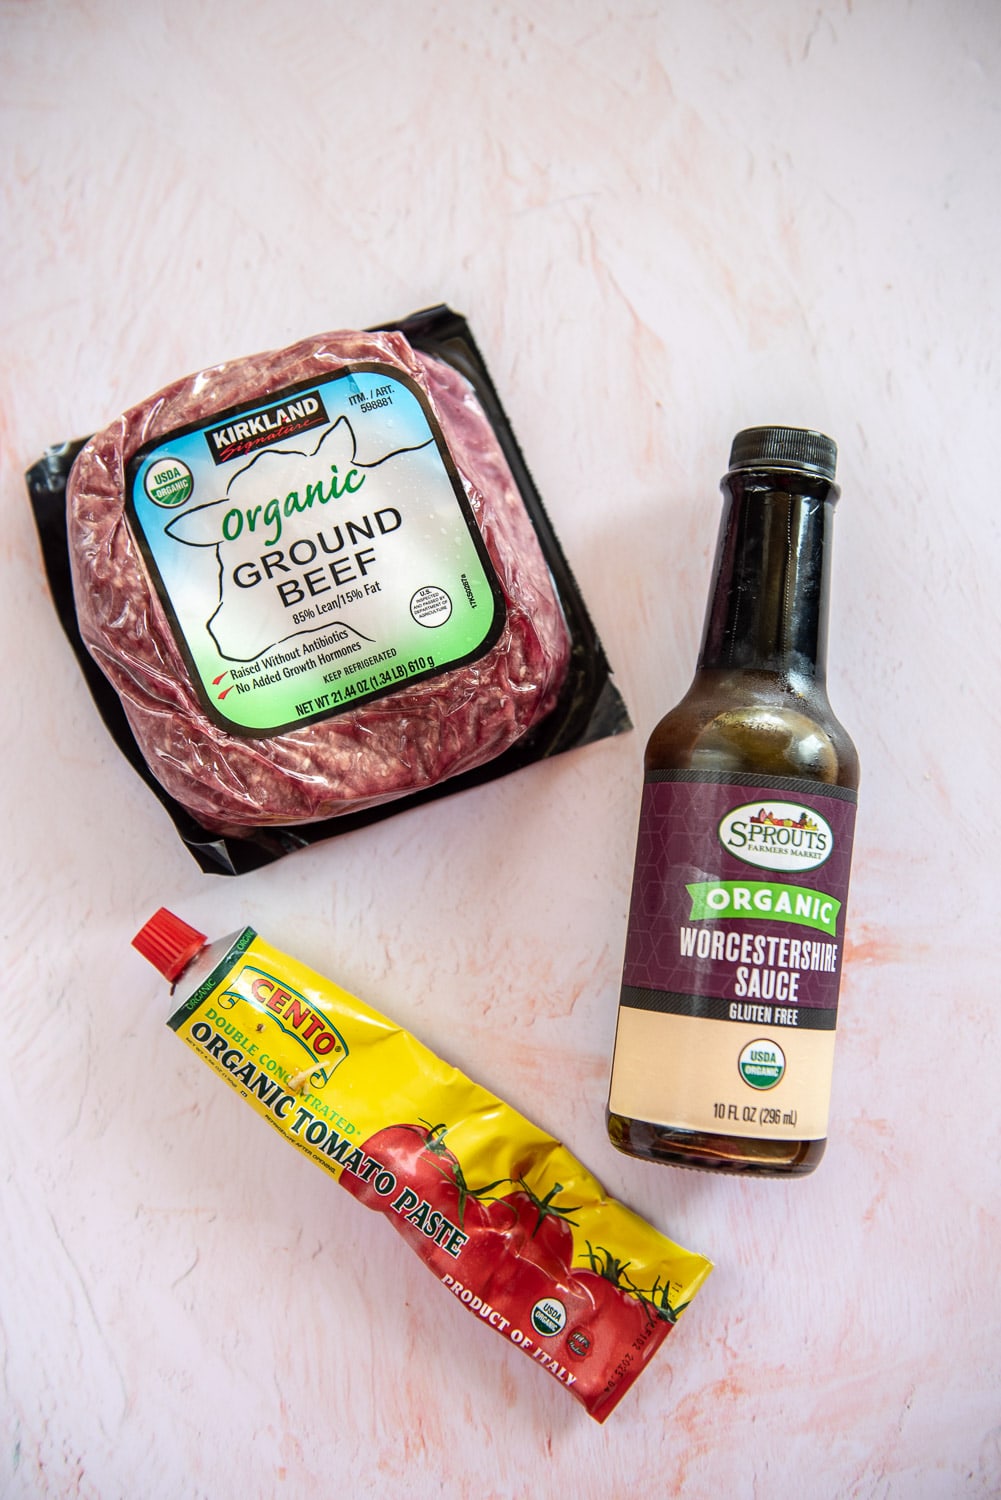 Pack of 1.34 lb ground beef, bottle of Worcestershire sauce, and tube of organic tomato paste with pink background